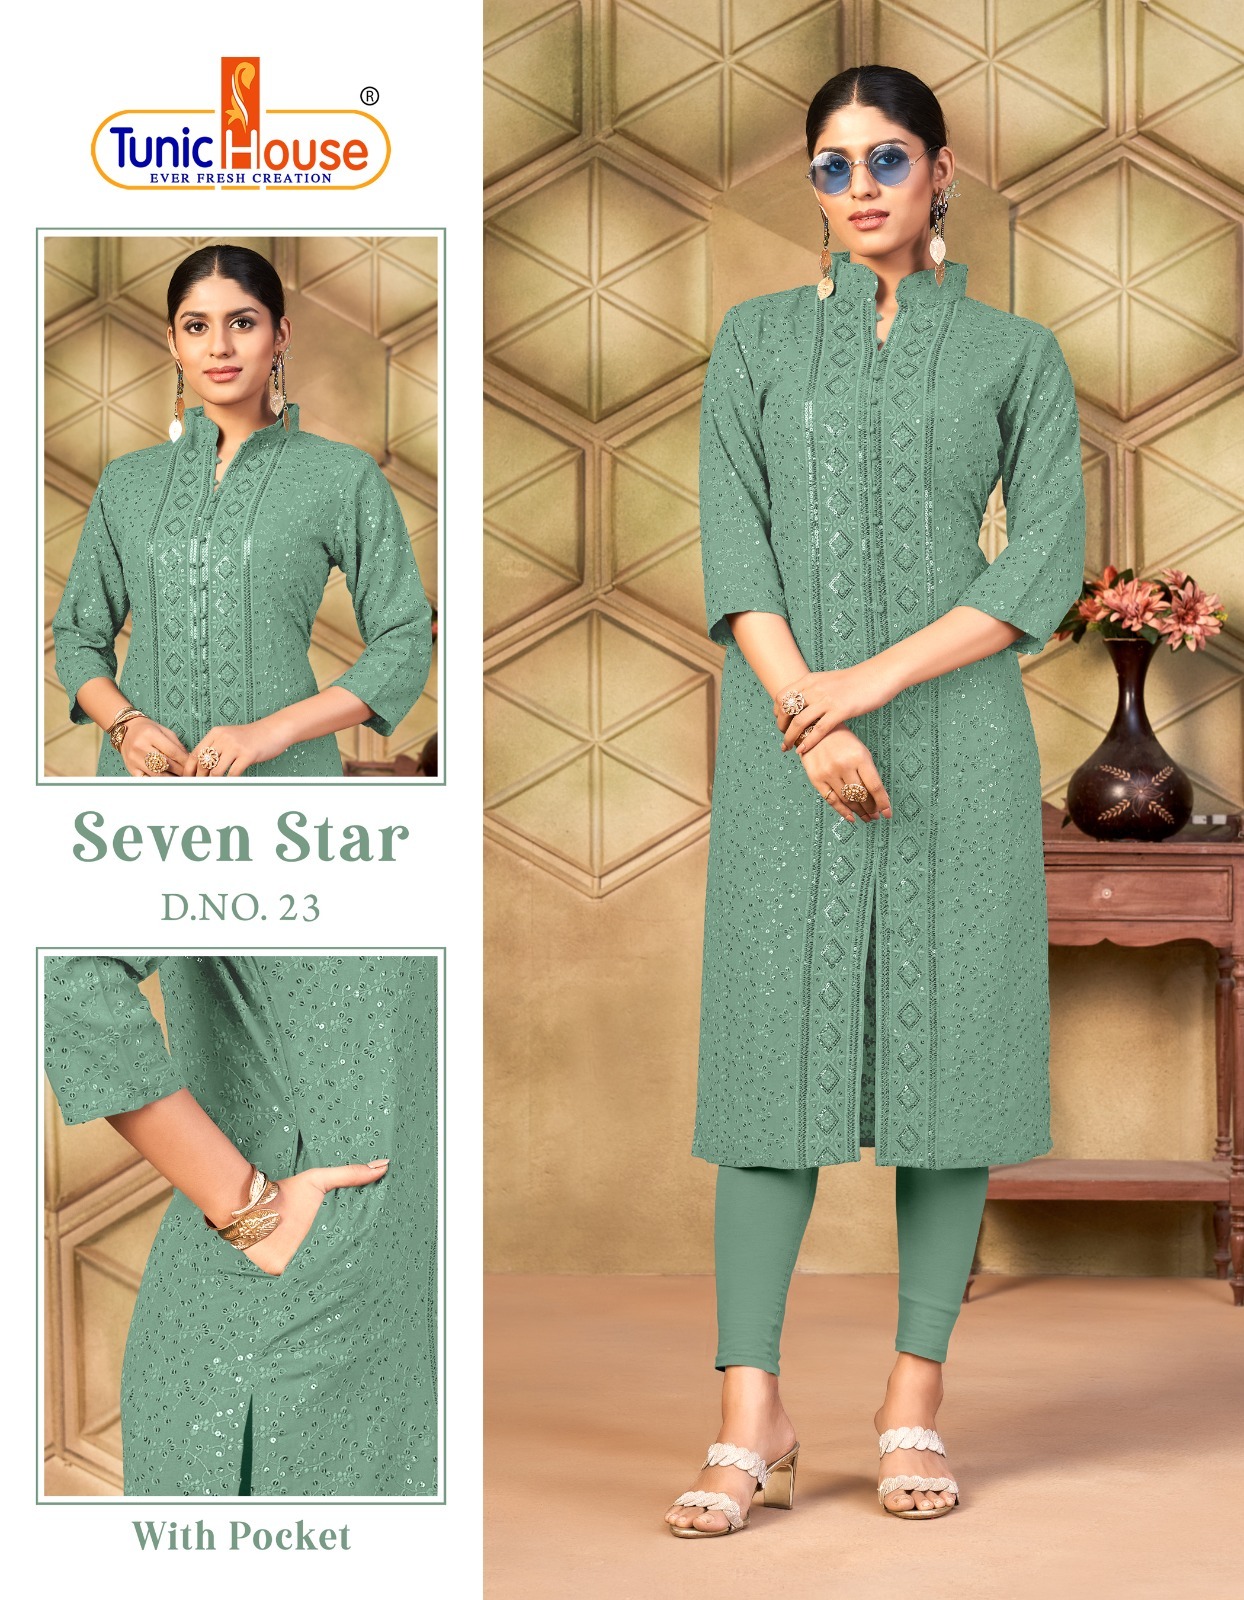 Tunic Houes 7 Star collection 2